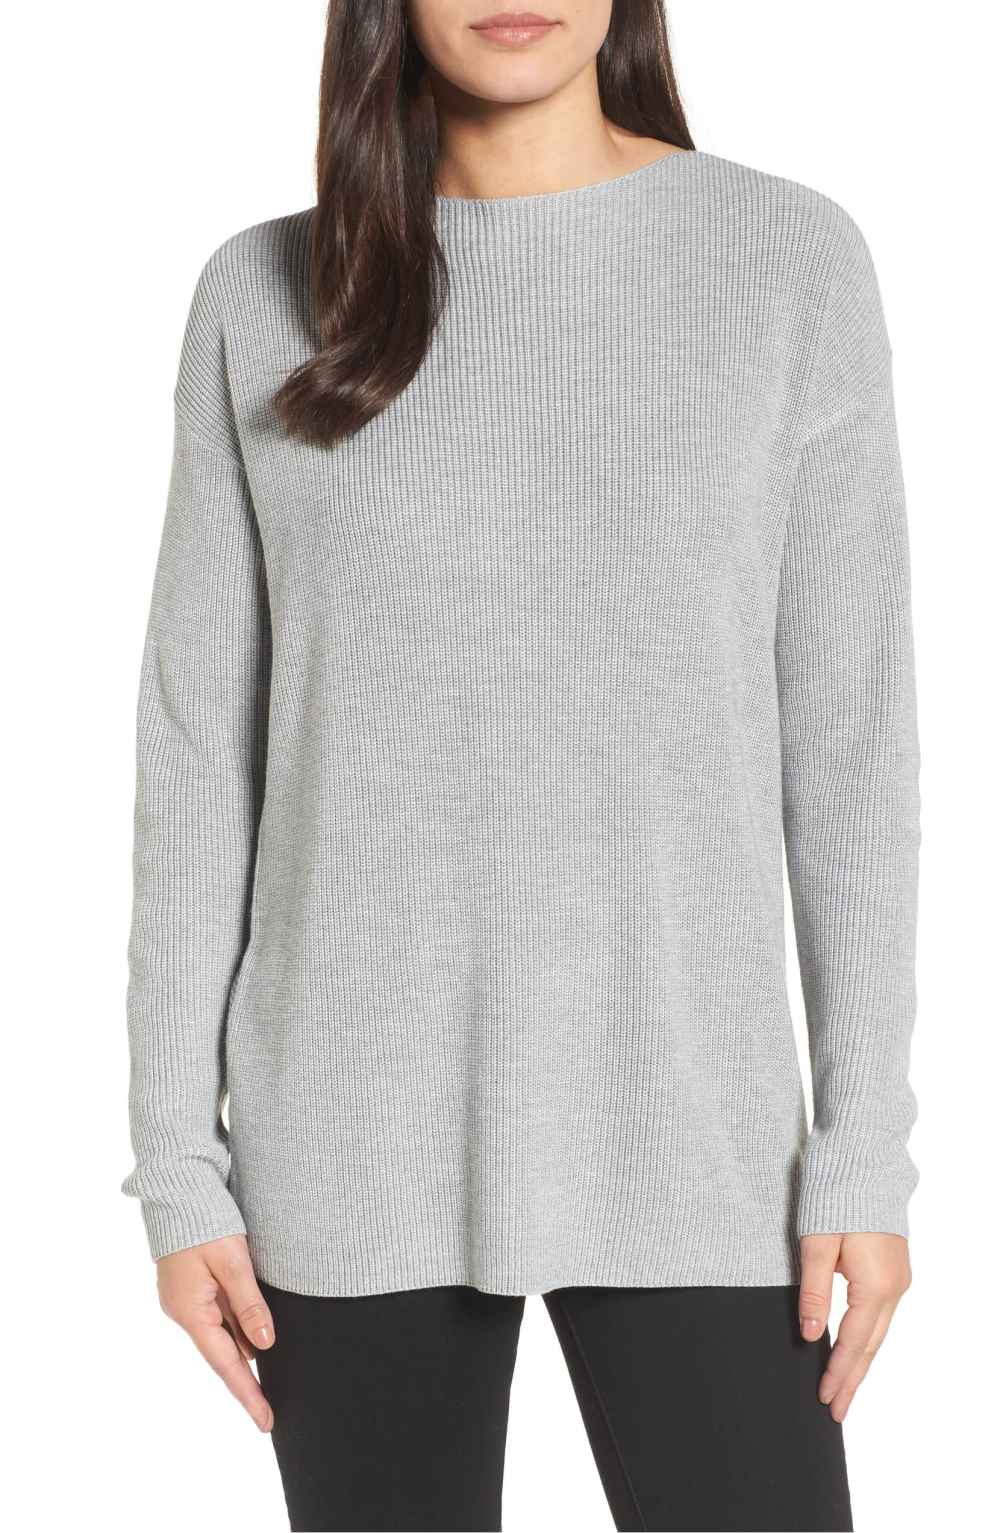 Shop This Cozy V-Back Sweater for Your Wardrobe This Fall | Us Weekly